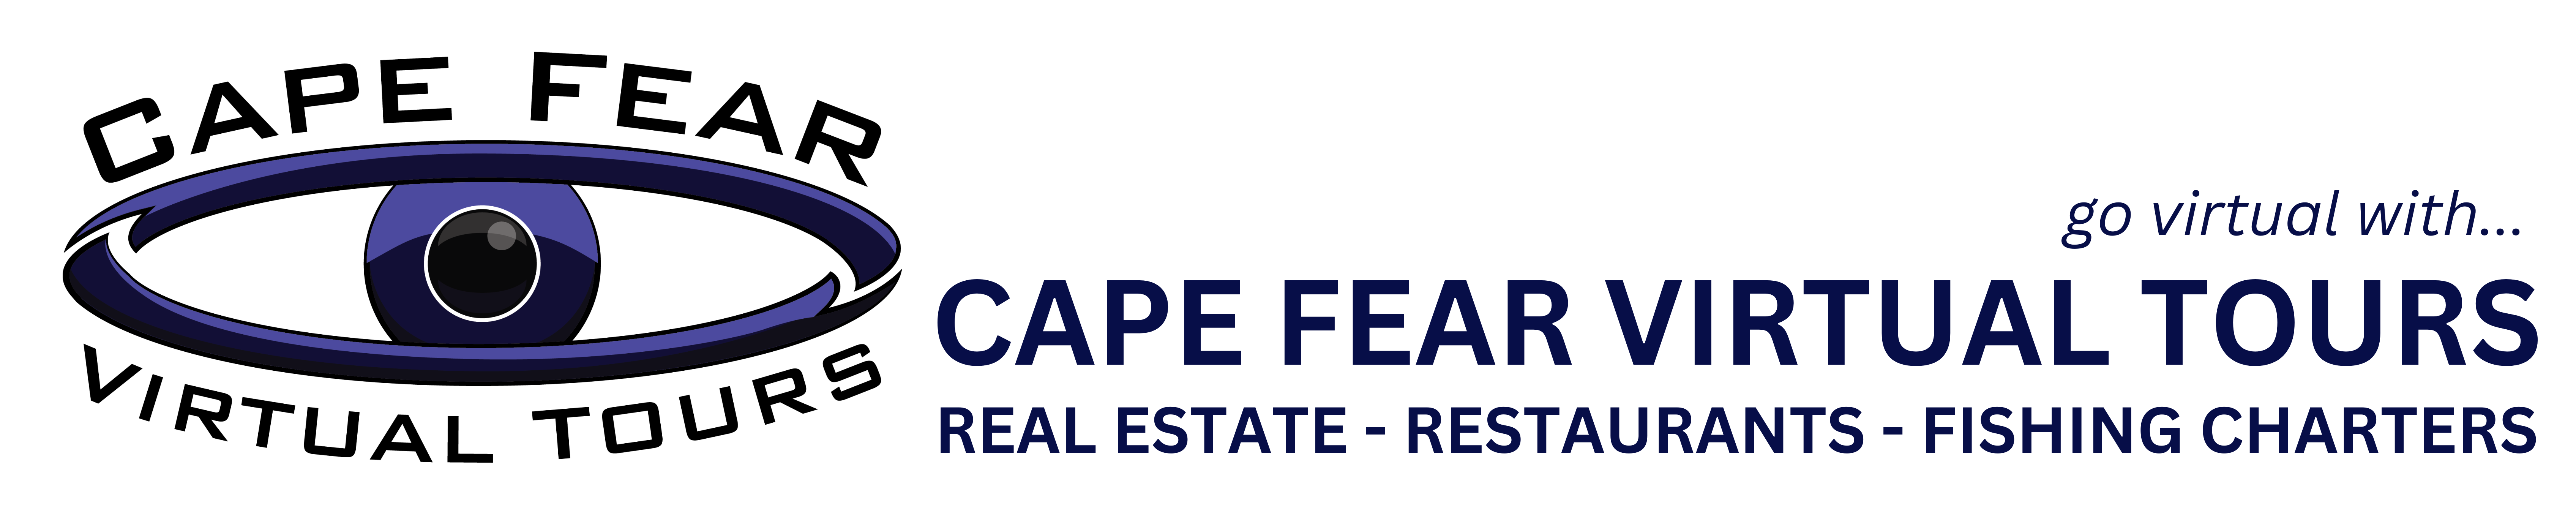 Cape fear virtual after search banner